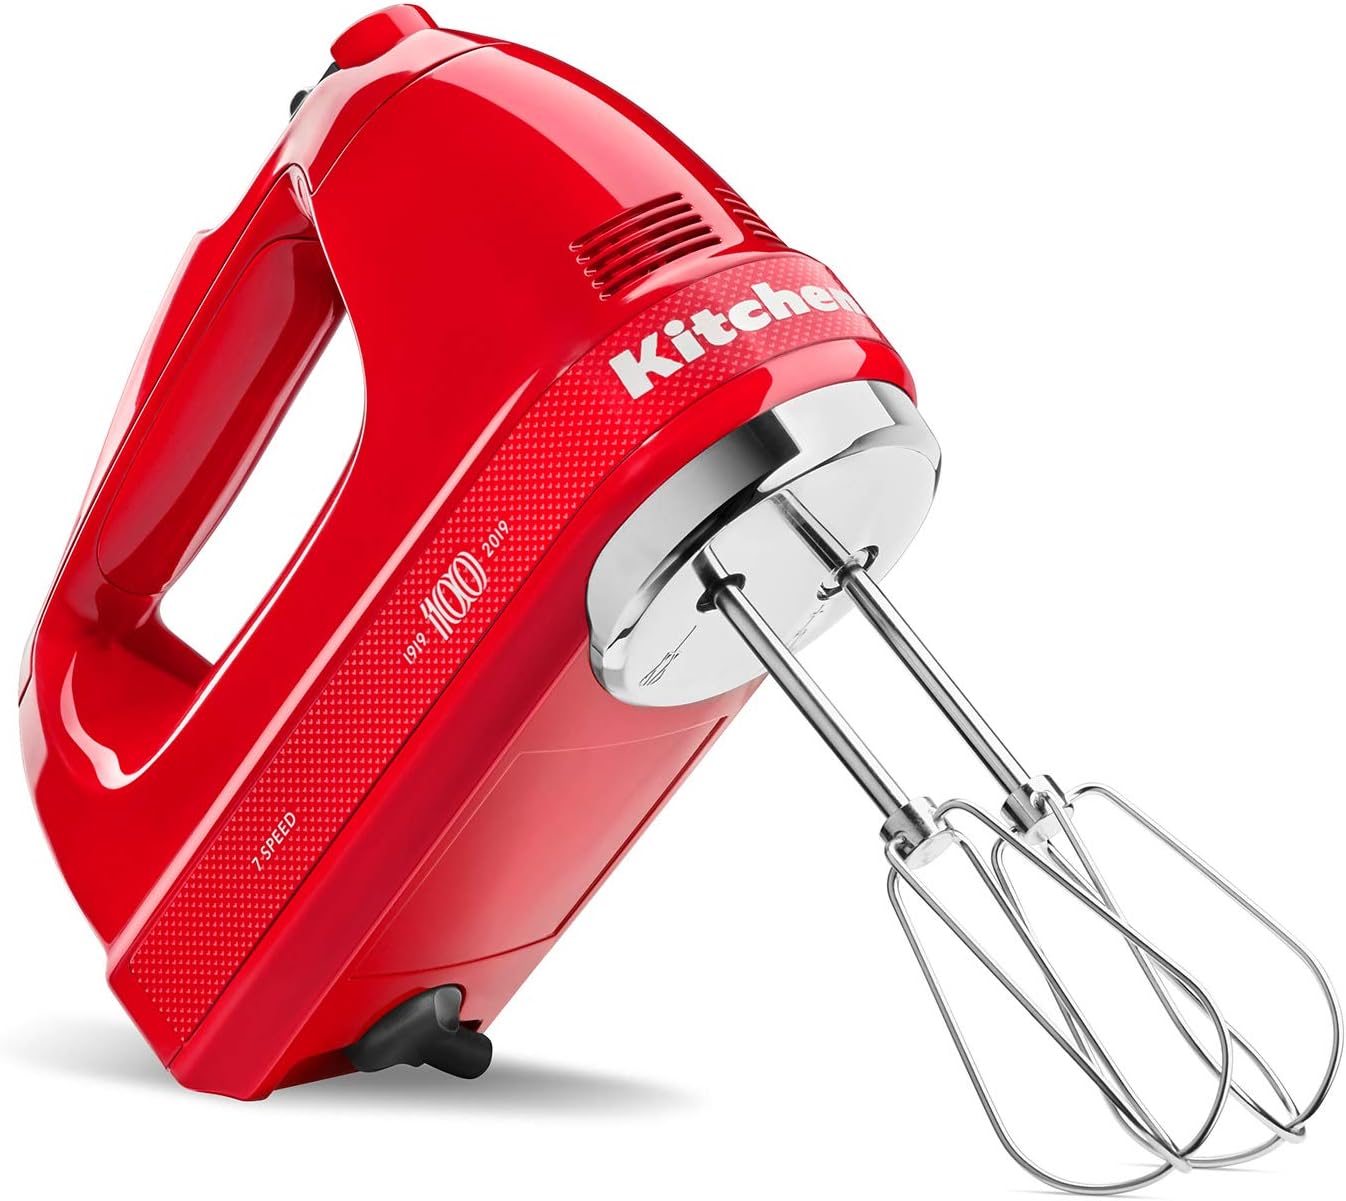 Kitchenaid KHM7210QHSD Queen of Hearts Hand Mixer, 7 Speeds, Passion Red